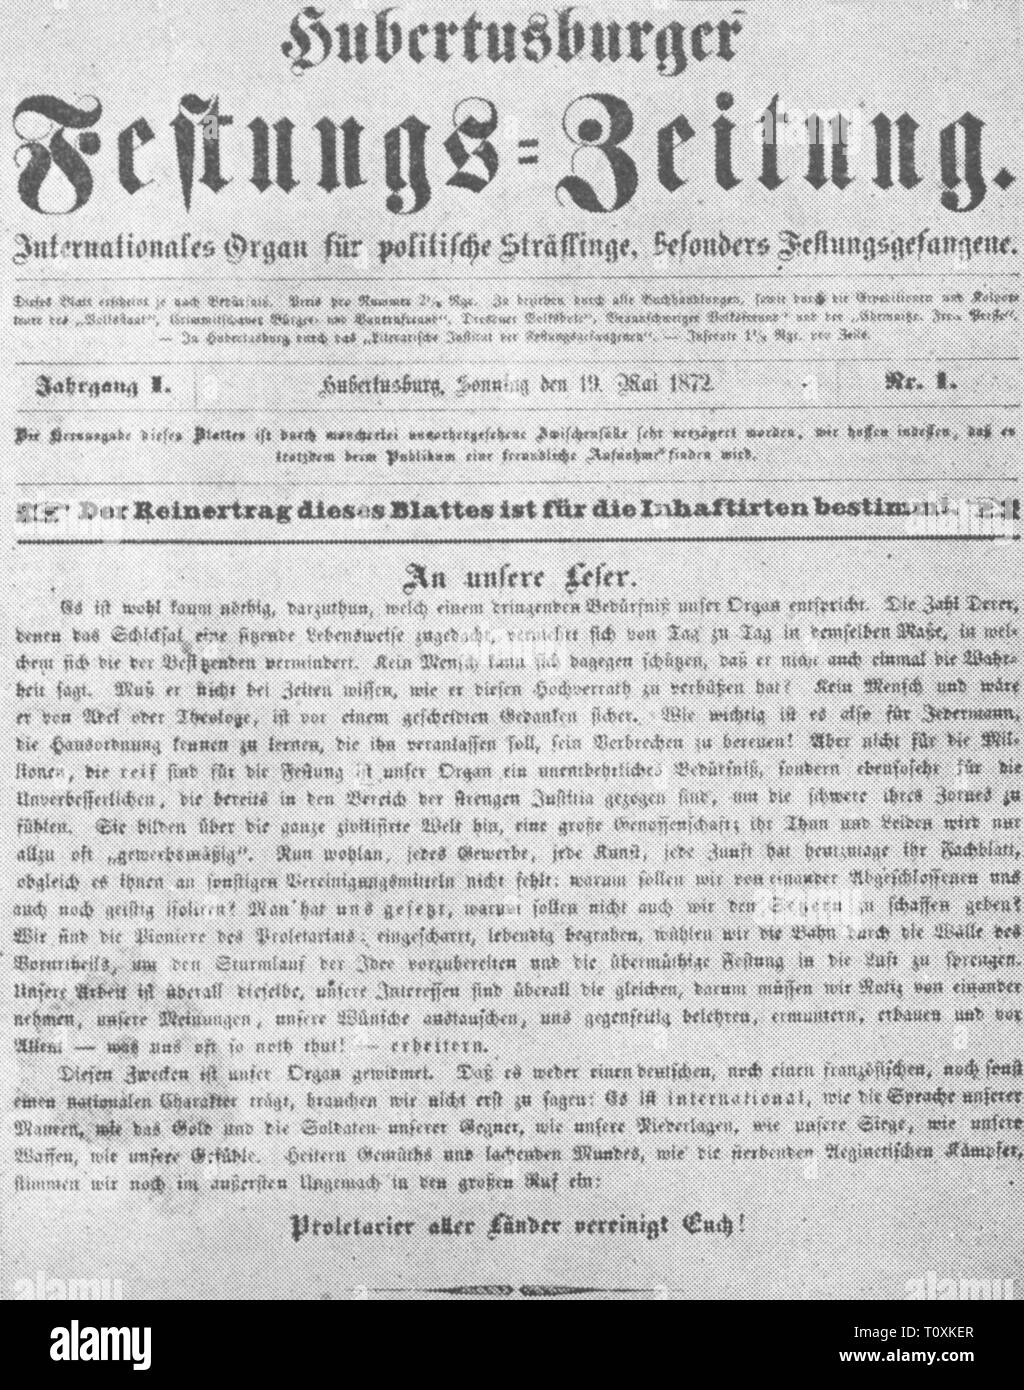 press / media, magazines, 'Hubertusburger Festungs-Zeitung', front page, volume I, number 1, Wermsdorf, 19.5.1872, Additional-Rights-Clearance-Info-Not-Available Stock Photo